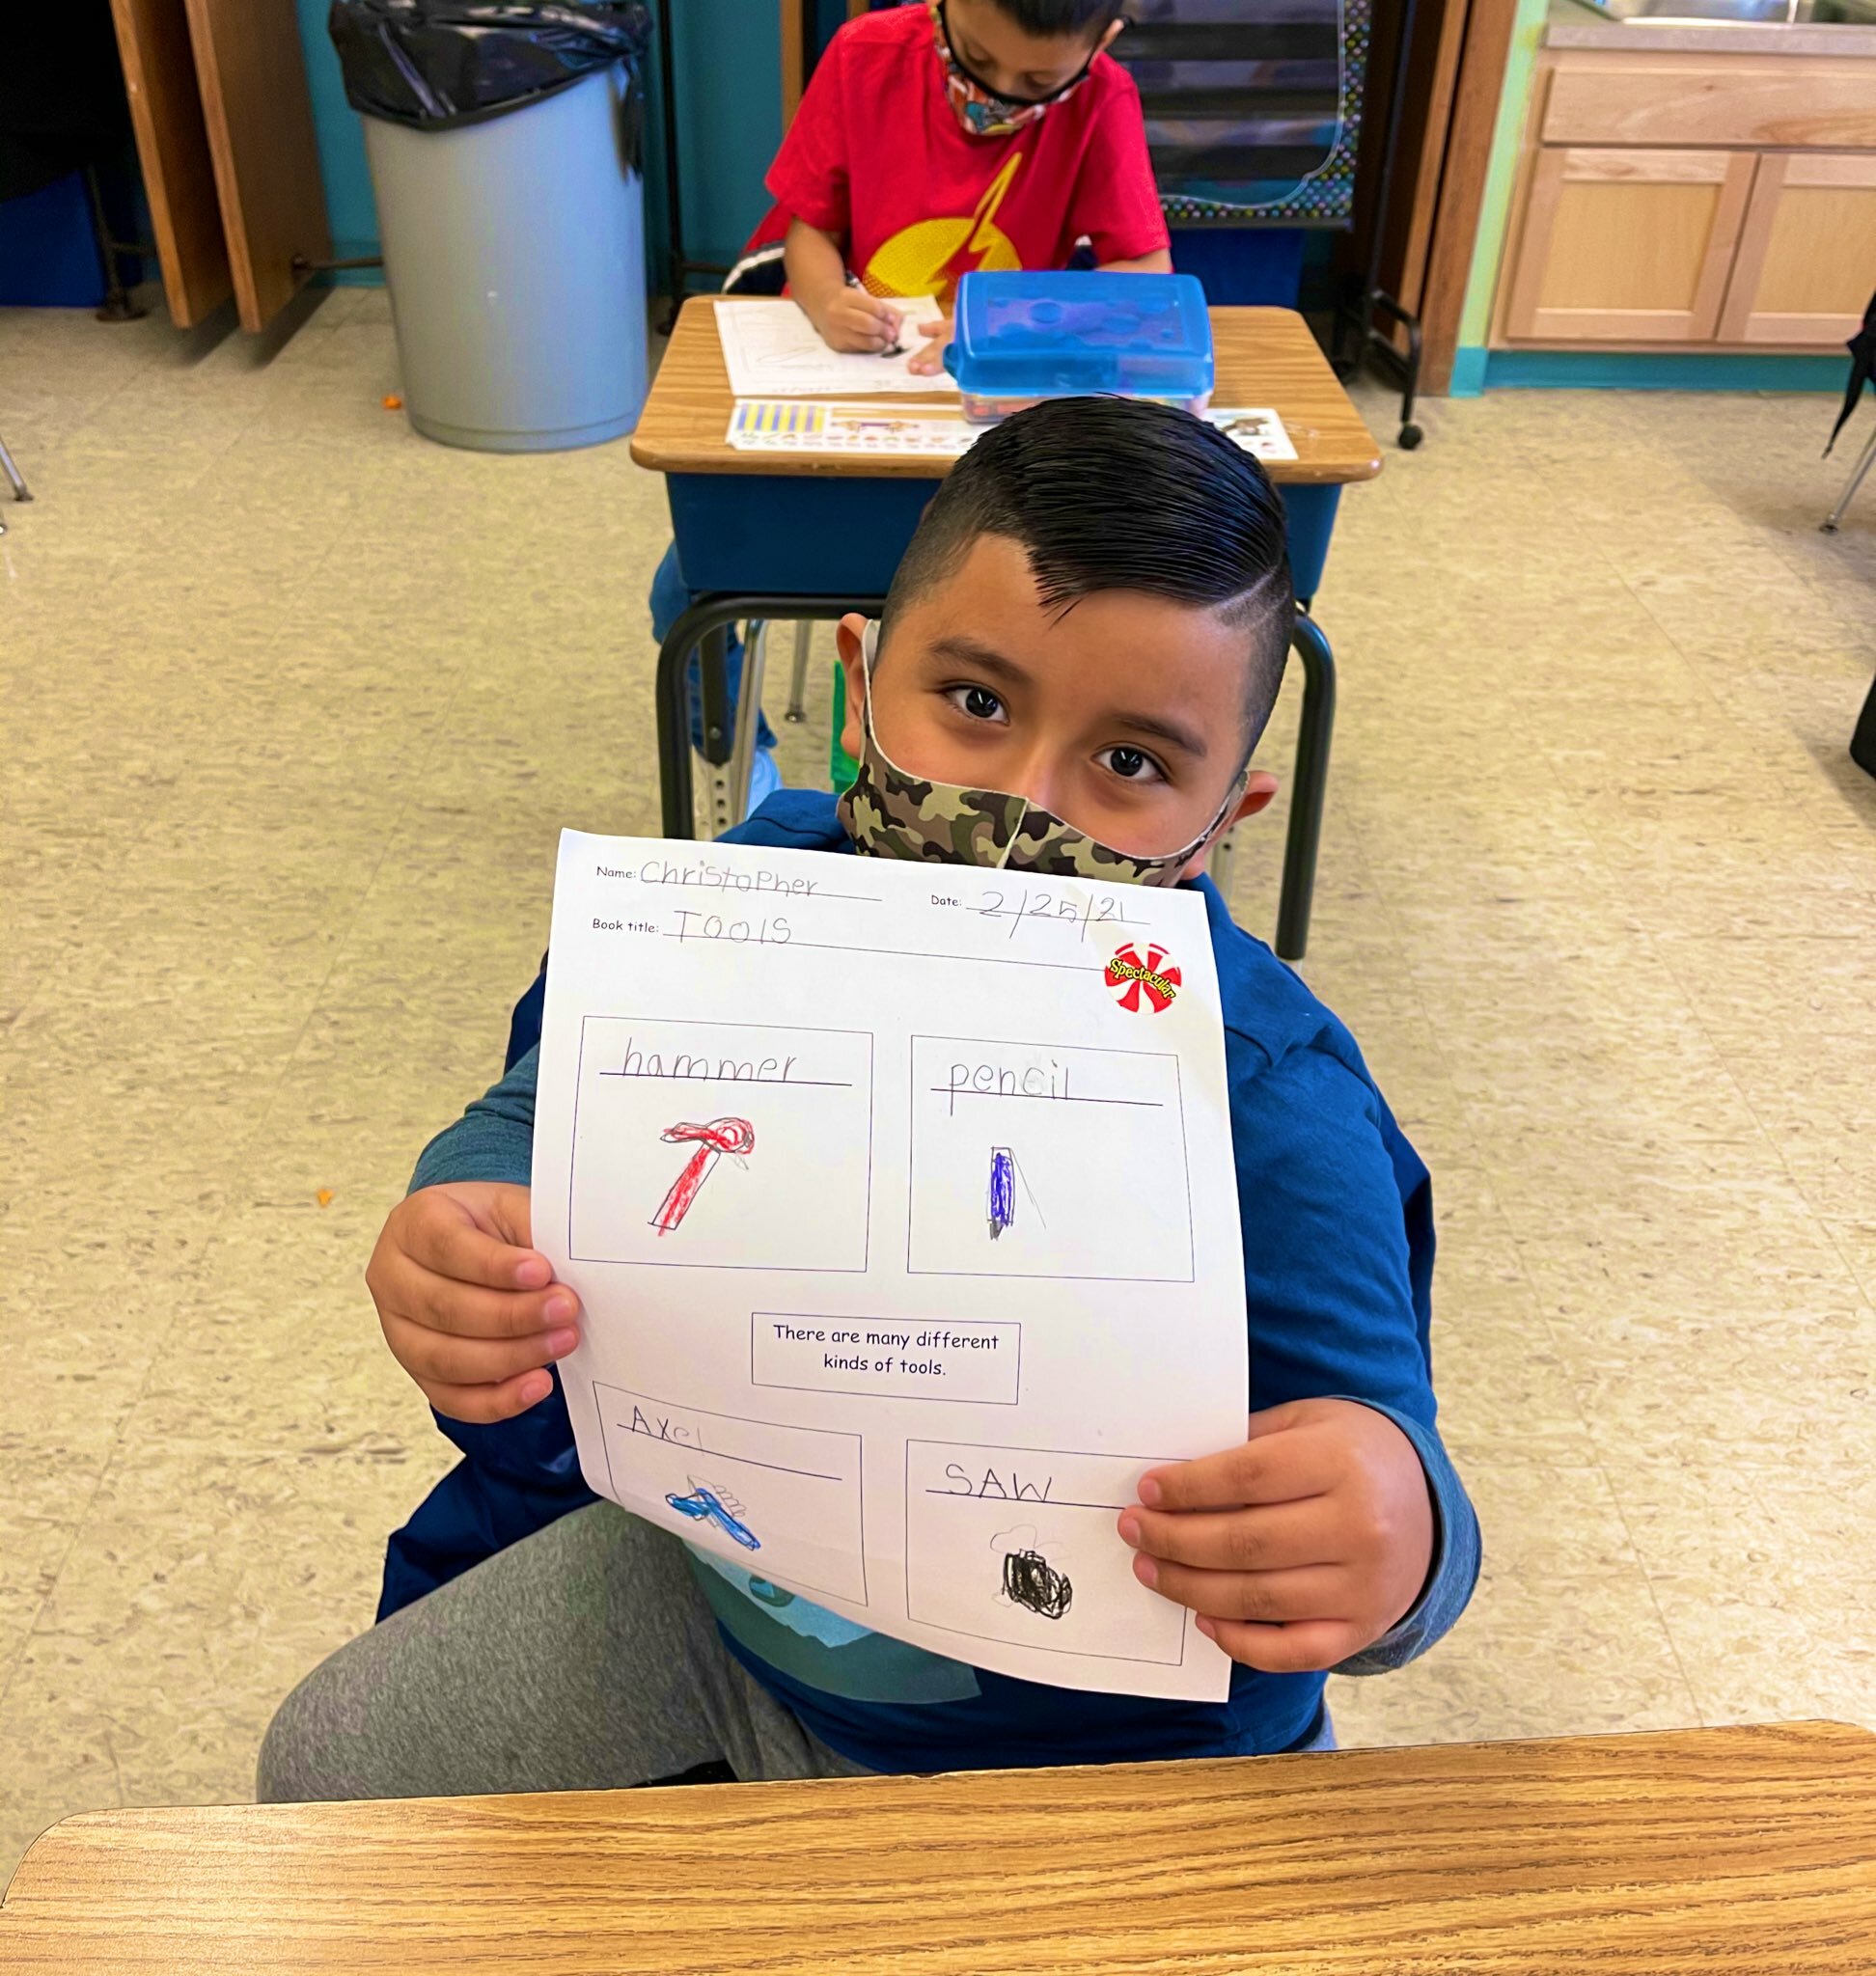 As part of a nonfiction reading unit, Lauren Mikelinich’s first graders at Hampton Bays Elementary School recently learned about different tools and how they are used around the world. The students took part in a number of activities, including drawing and writing about the various tools.